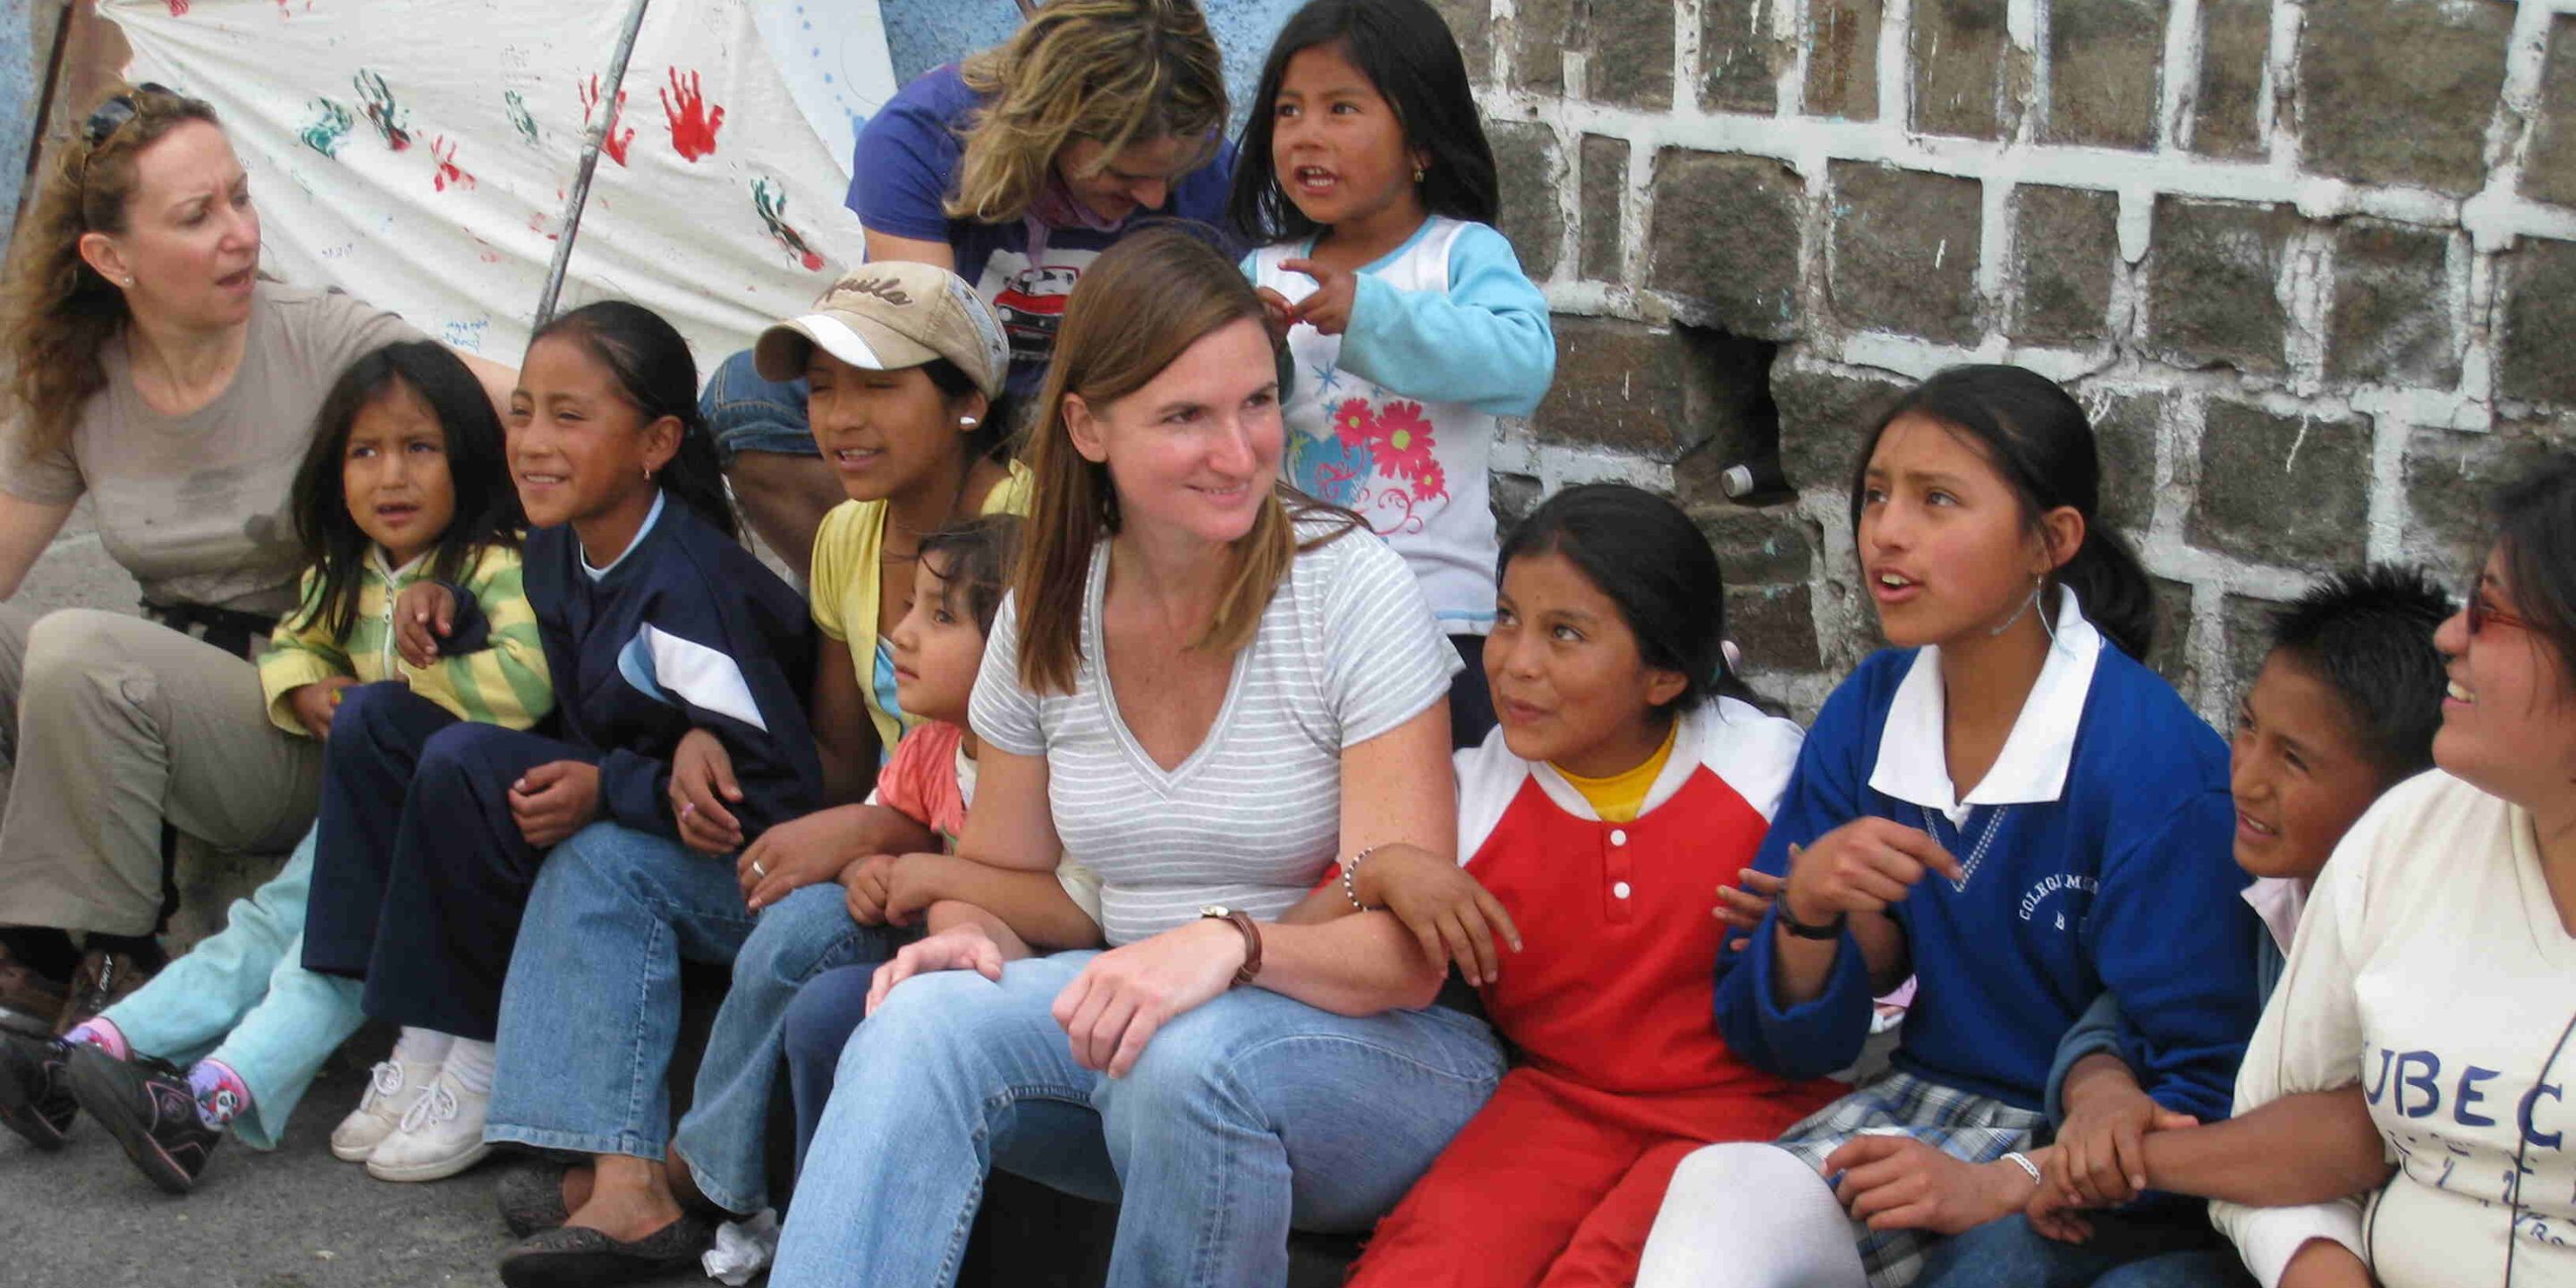 Tania in Ecuador, working with ViaNinos, which fundraises to support the local children and help them get an education.